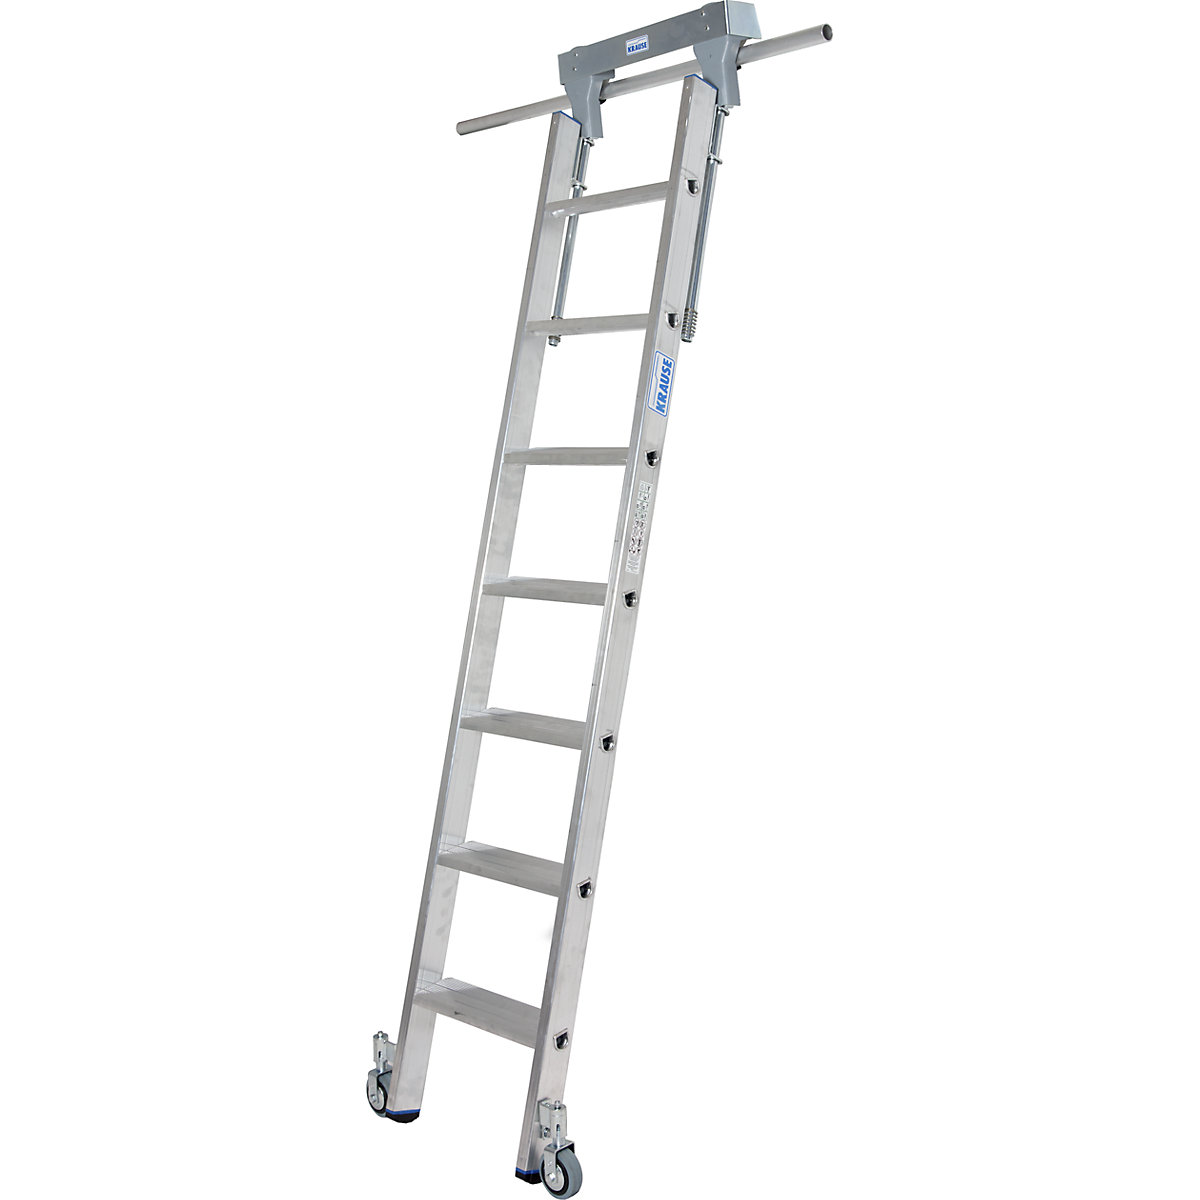 KRAUSE – Step shelf ladder, with wheels on top for round tubing rail system, 7 steps